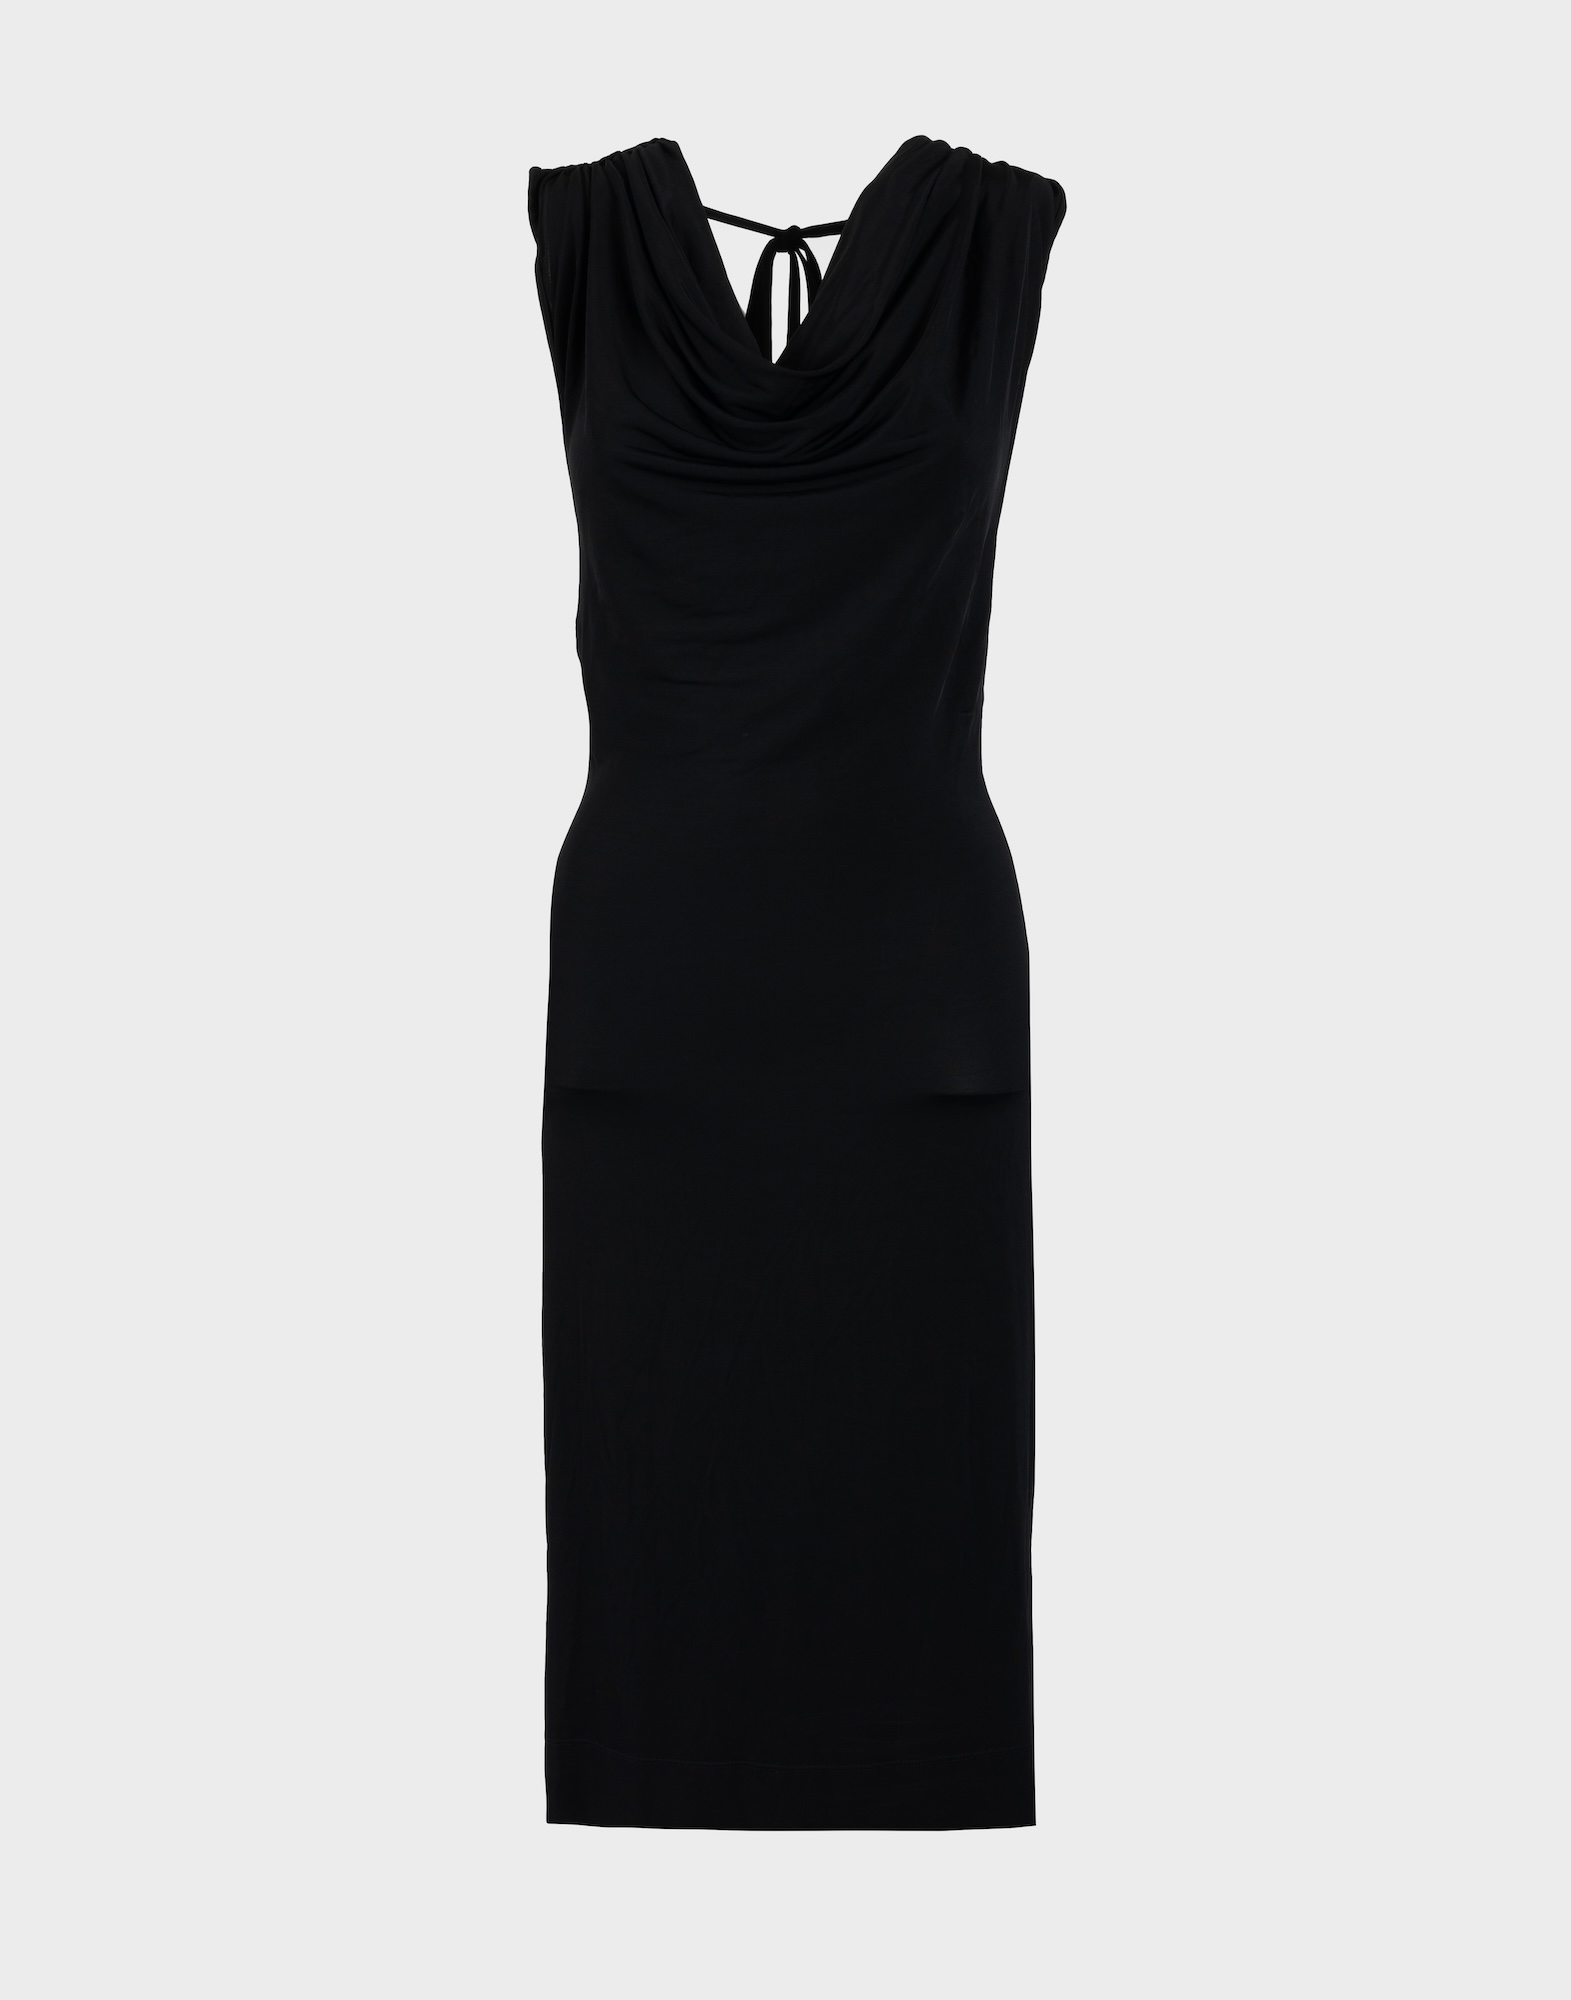 black stretch sleeveless dress with shawl neckline and open back with bows